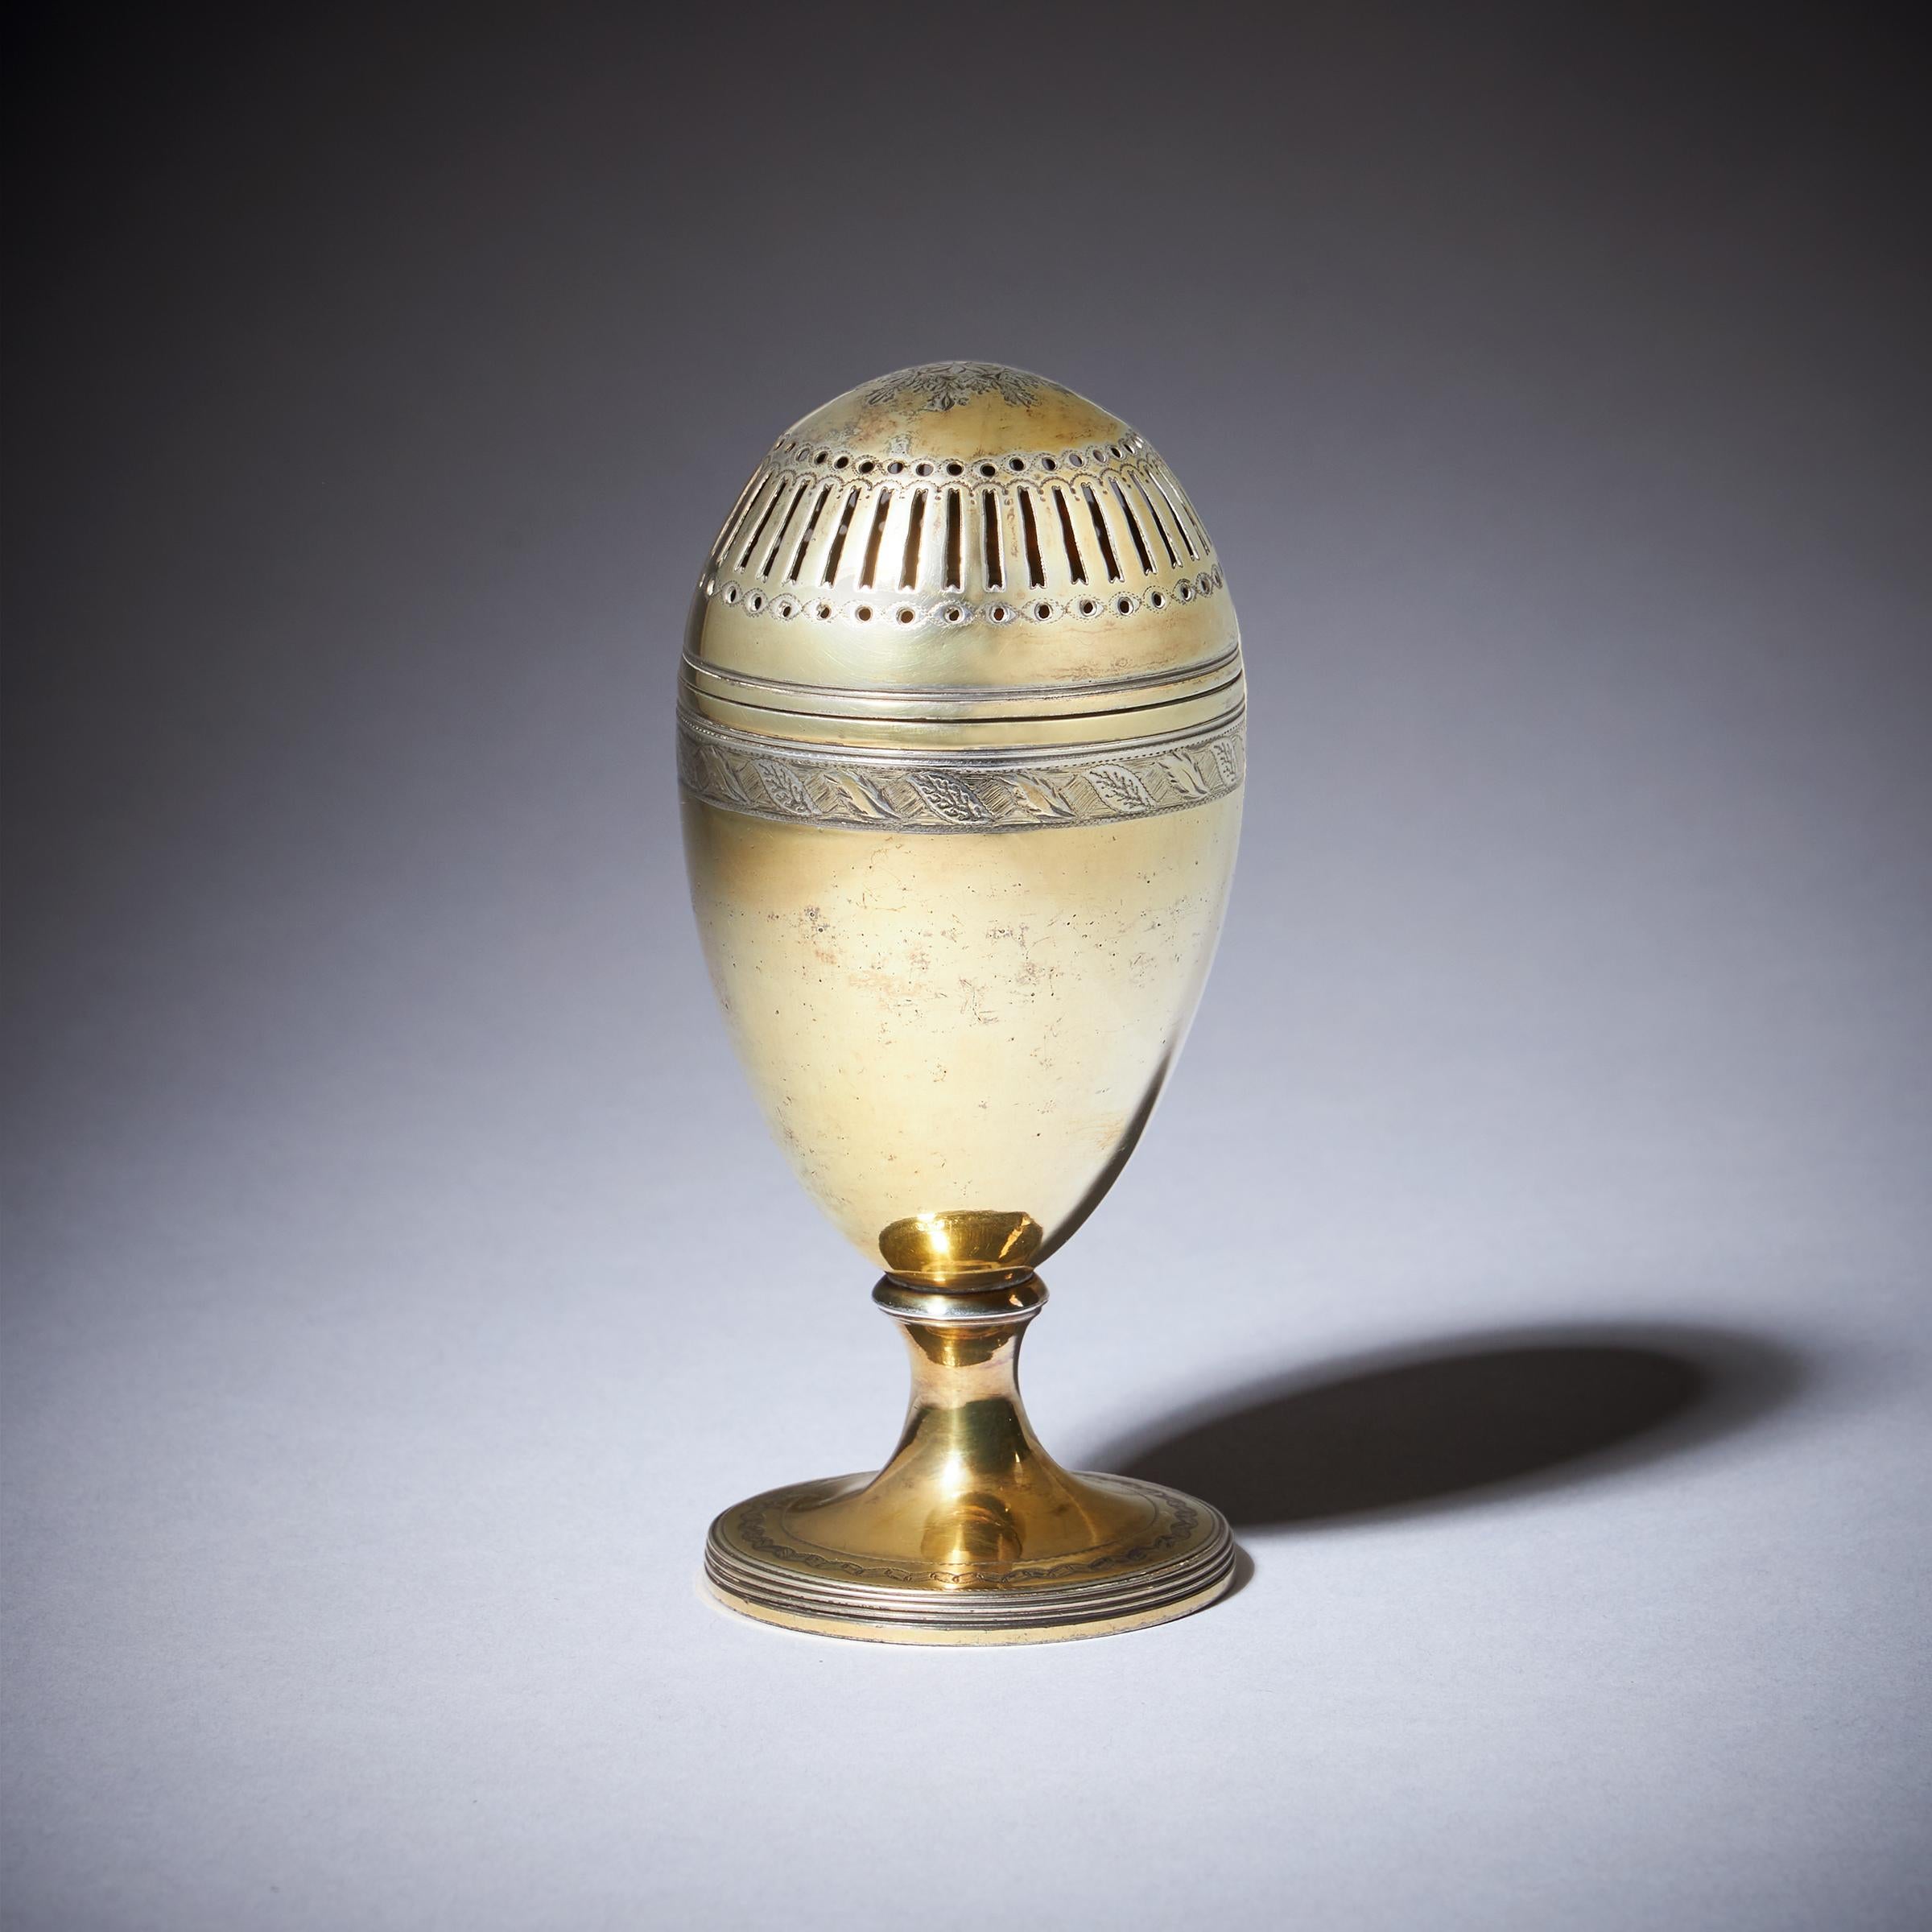 George III Silver-Gilt Pepper Pot with the Royal Cypher of Queen Charlotte 1798-3